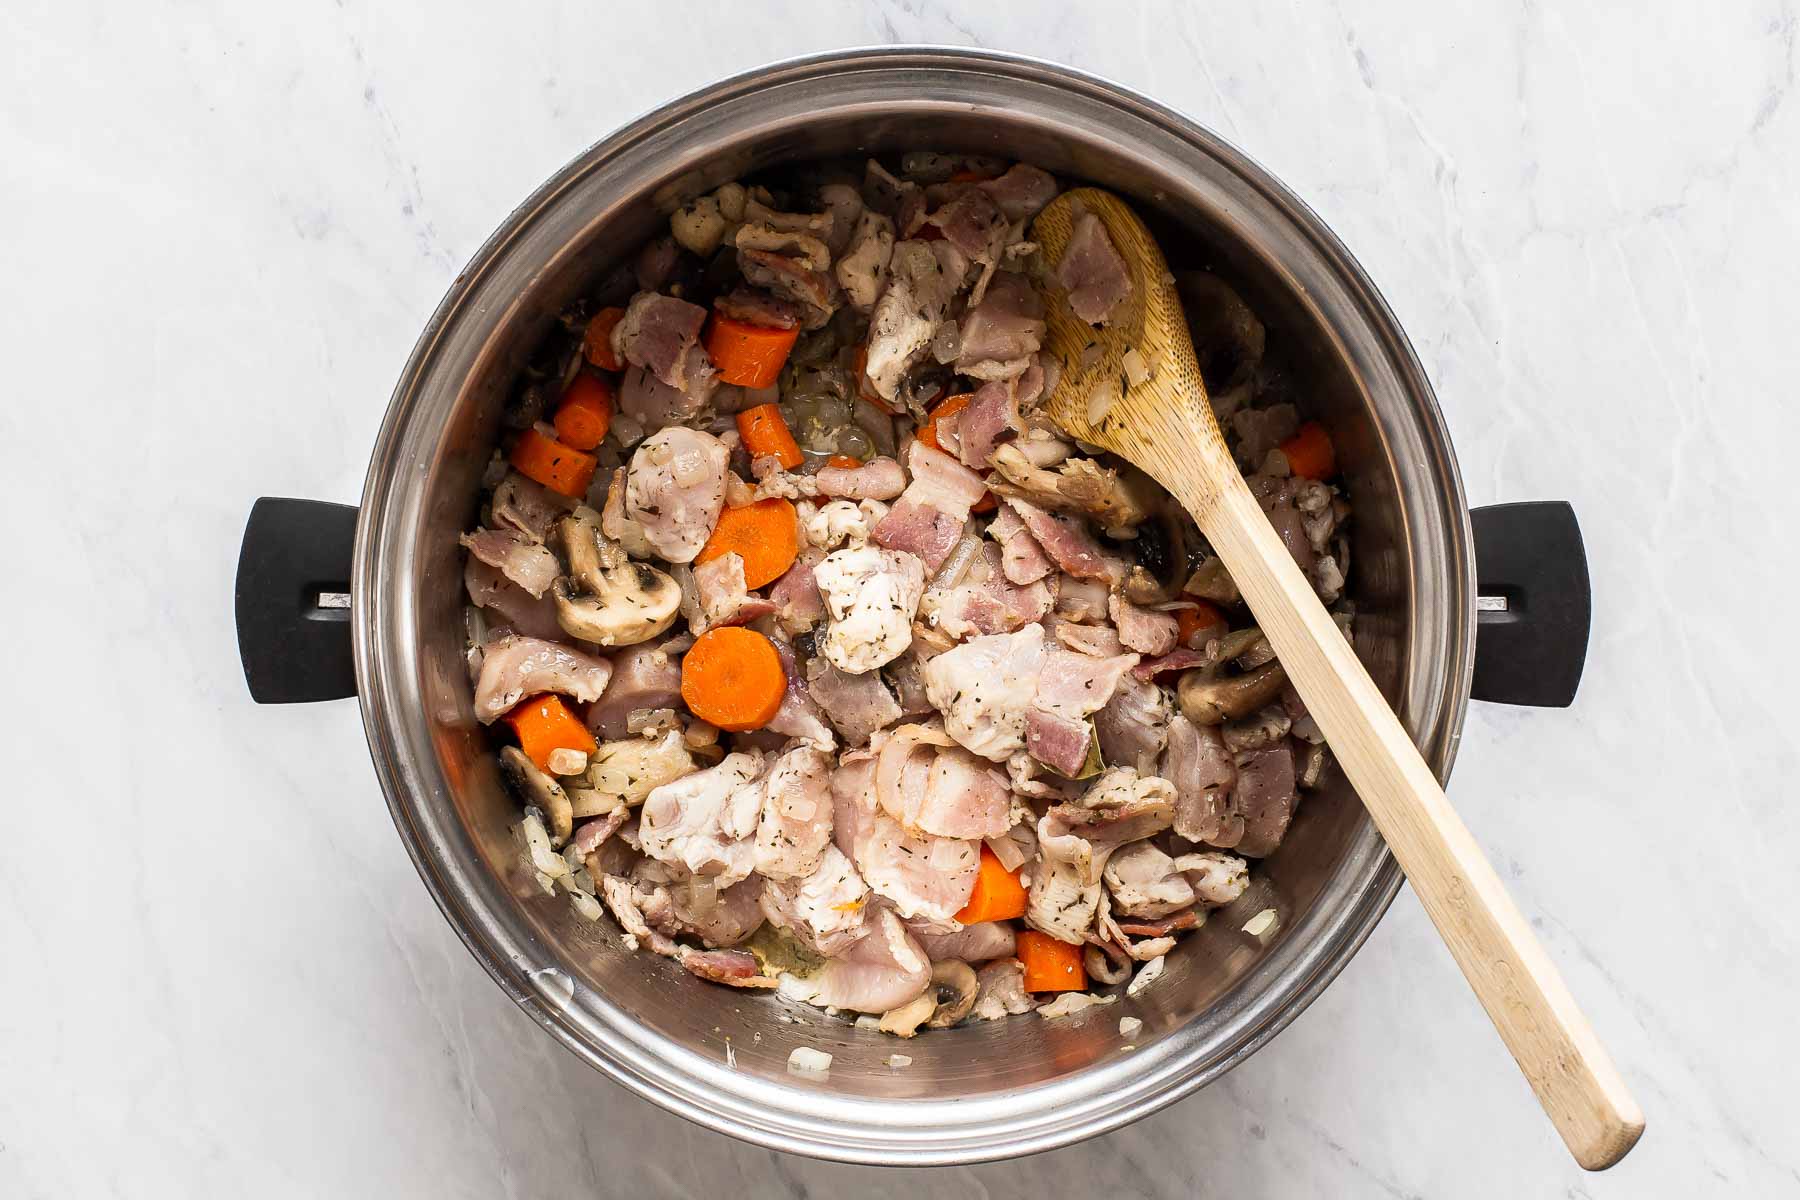 Chicken pieces in vegetables, sautéing in a stock pot.